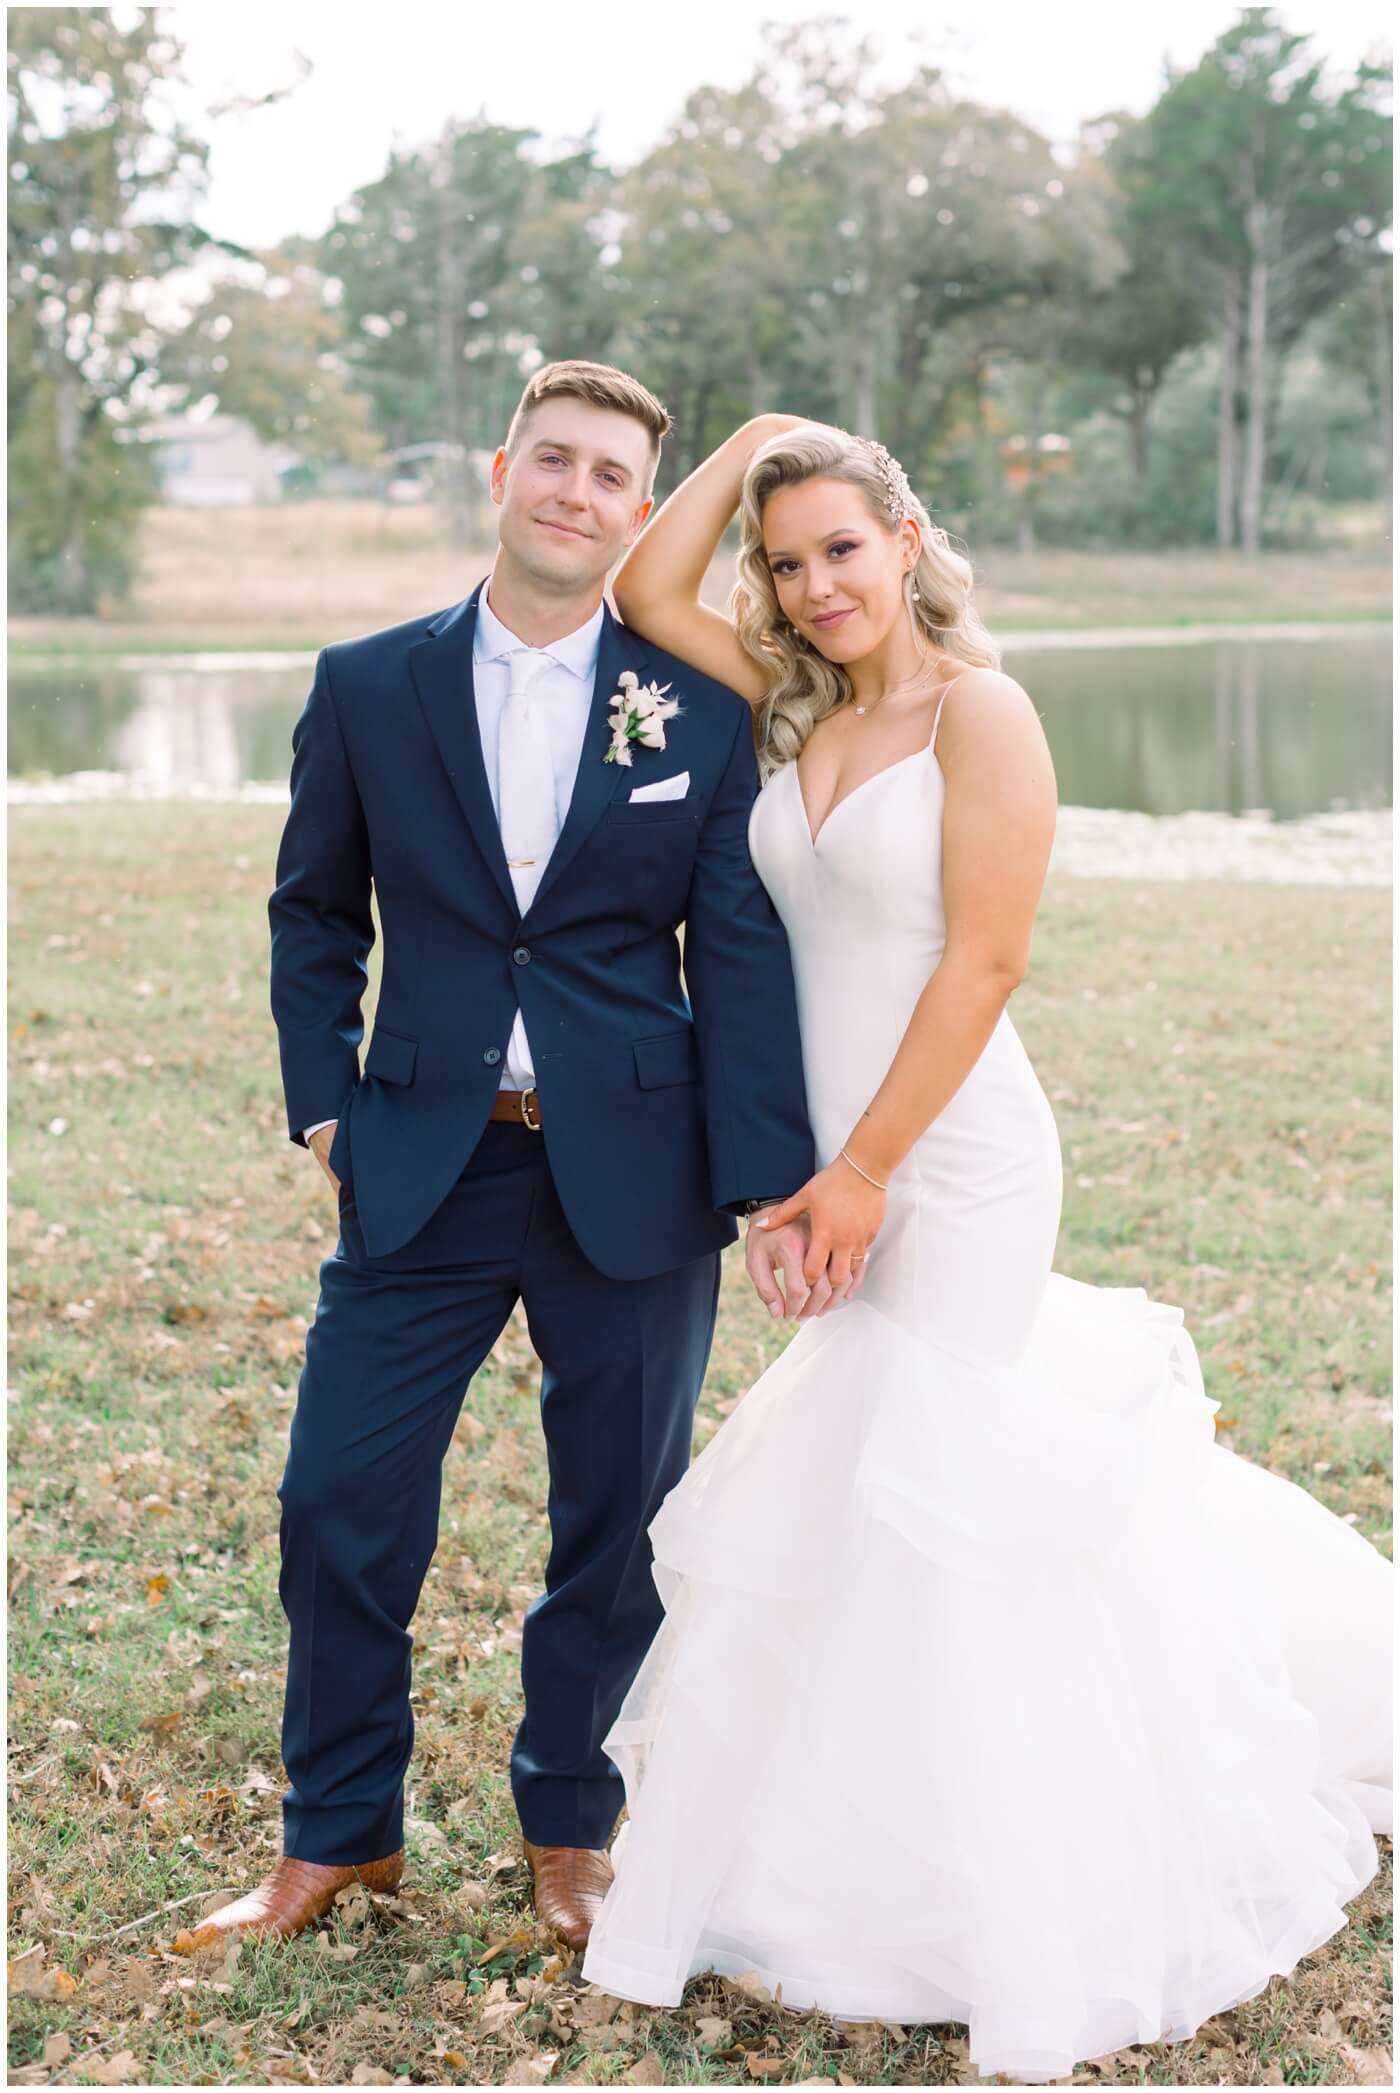 Houston Wedding at The Vine | the bride and groom smiling on their wedding day 